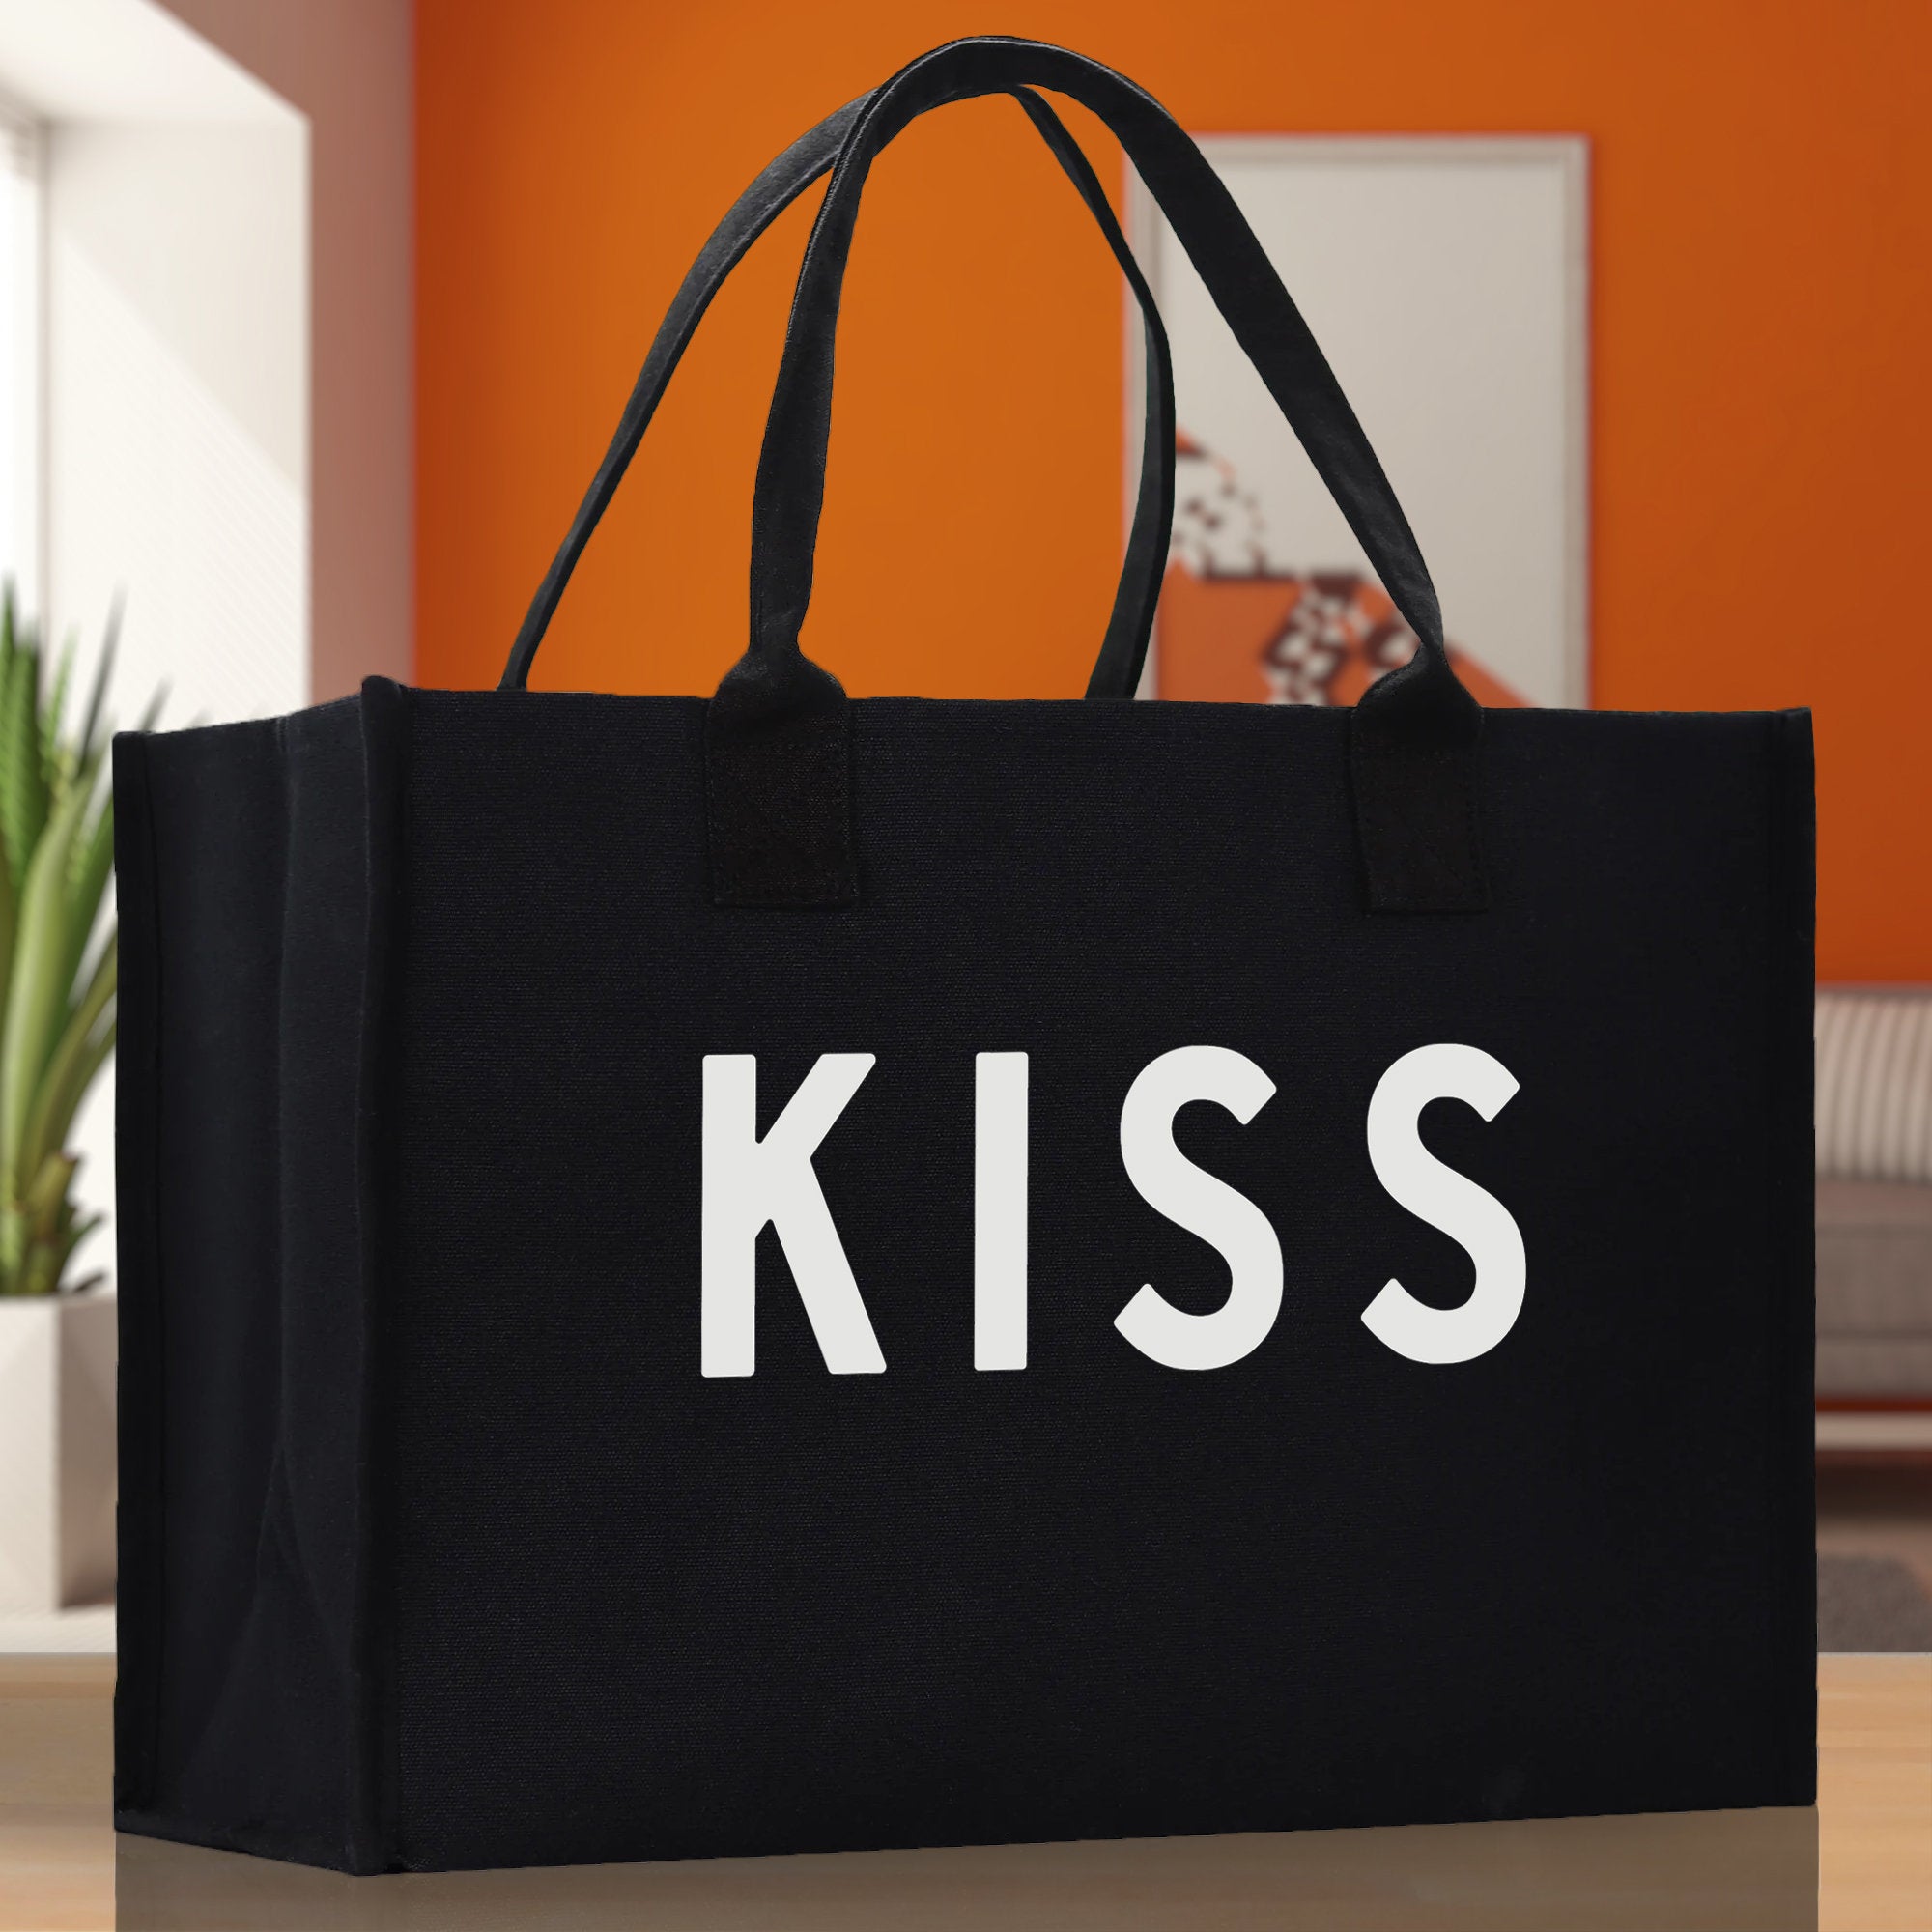 Kiss Cotton Canvas Chic Beach Tote Bag Multipurpose Tote Weekender Tote Gift for Her Outdoor Tote Vacation Tote Large Beach Bag